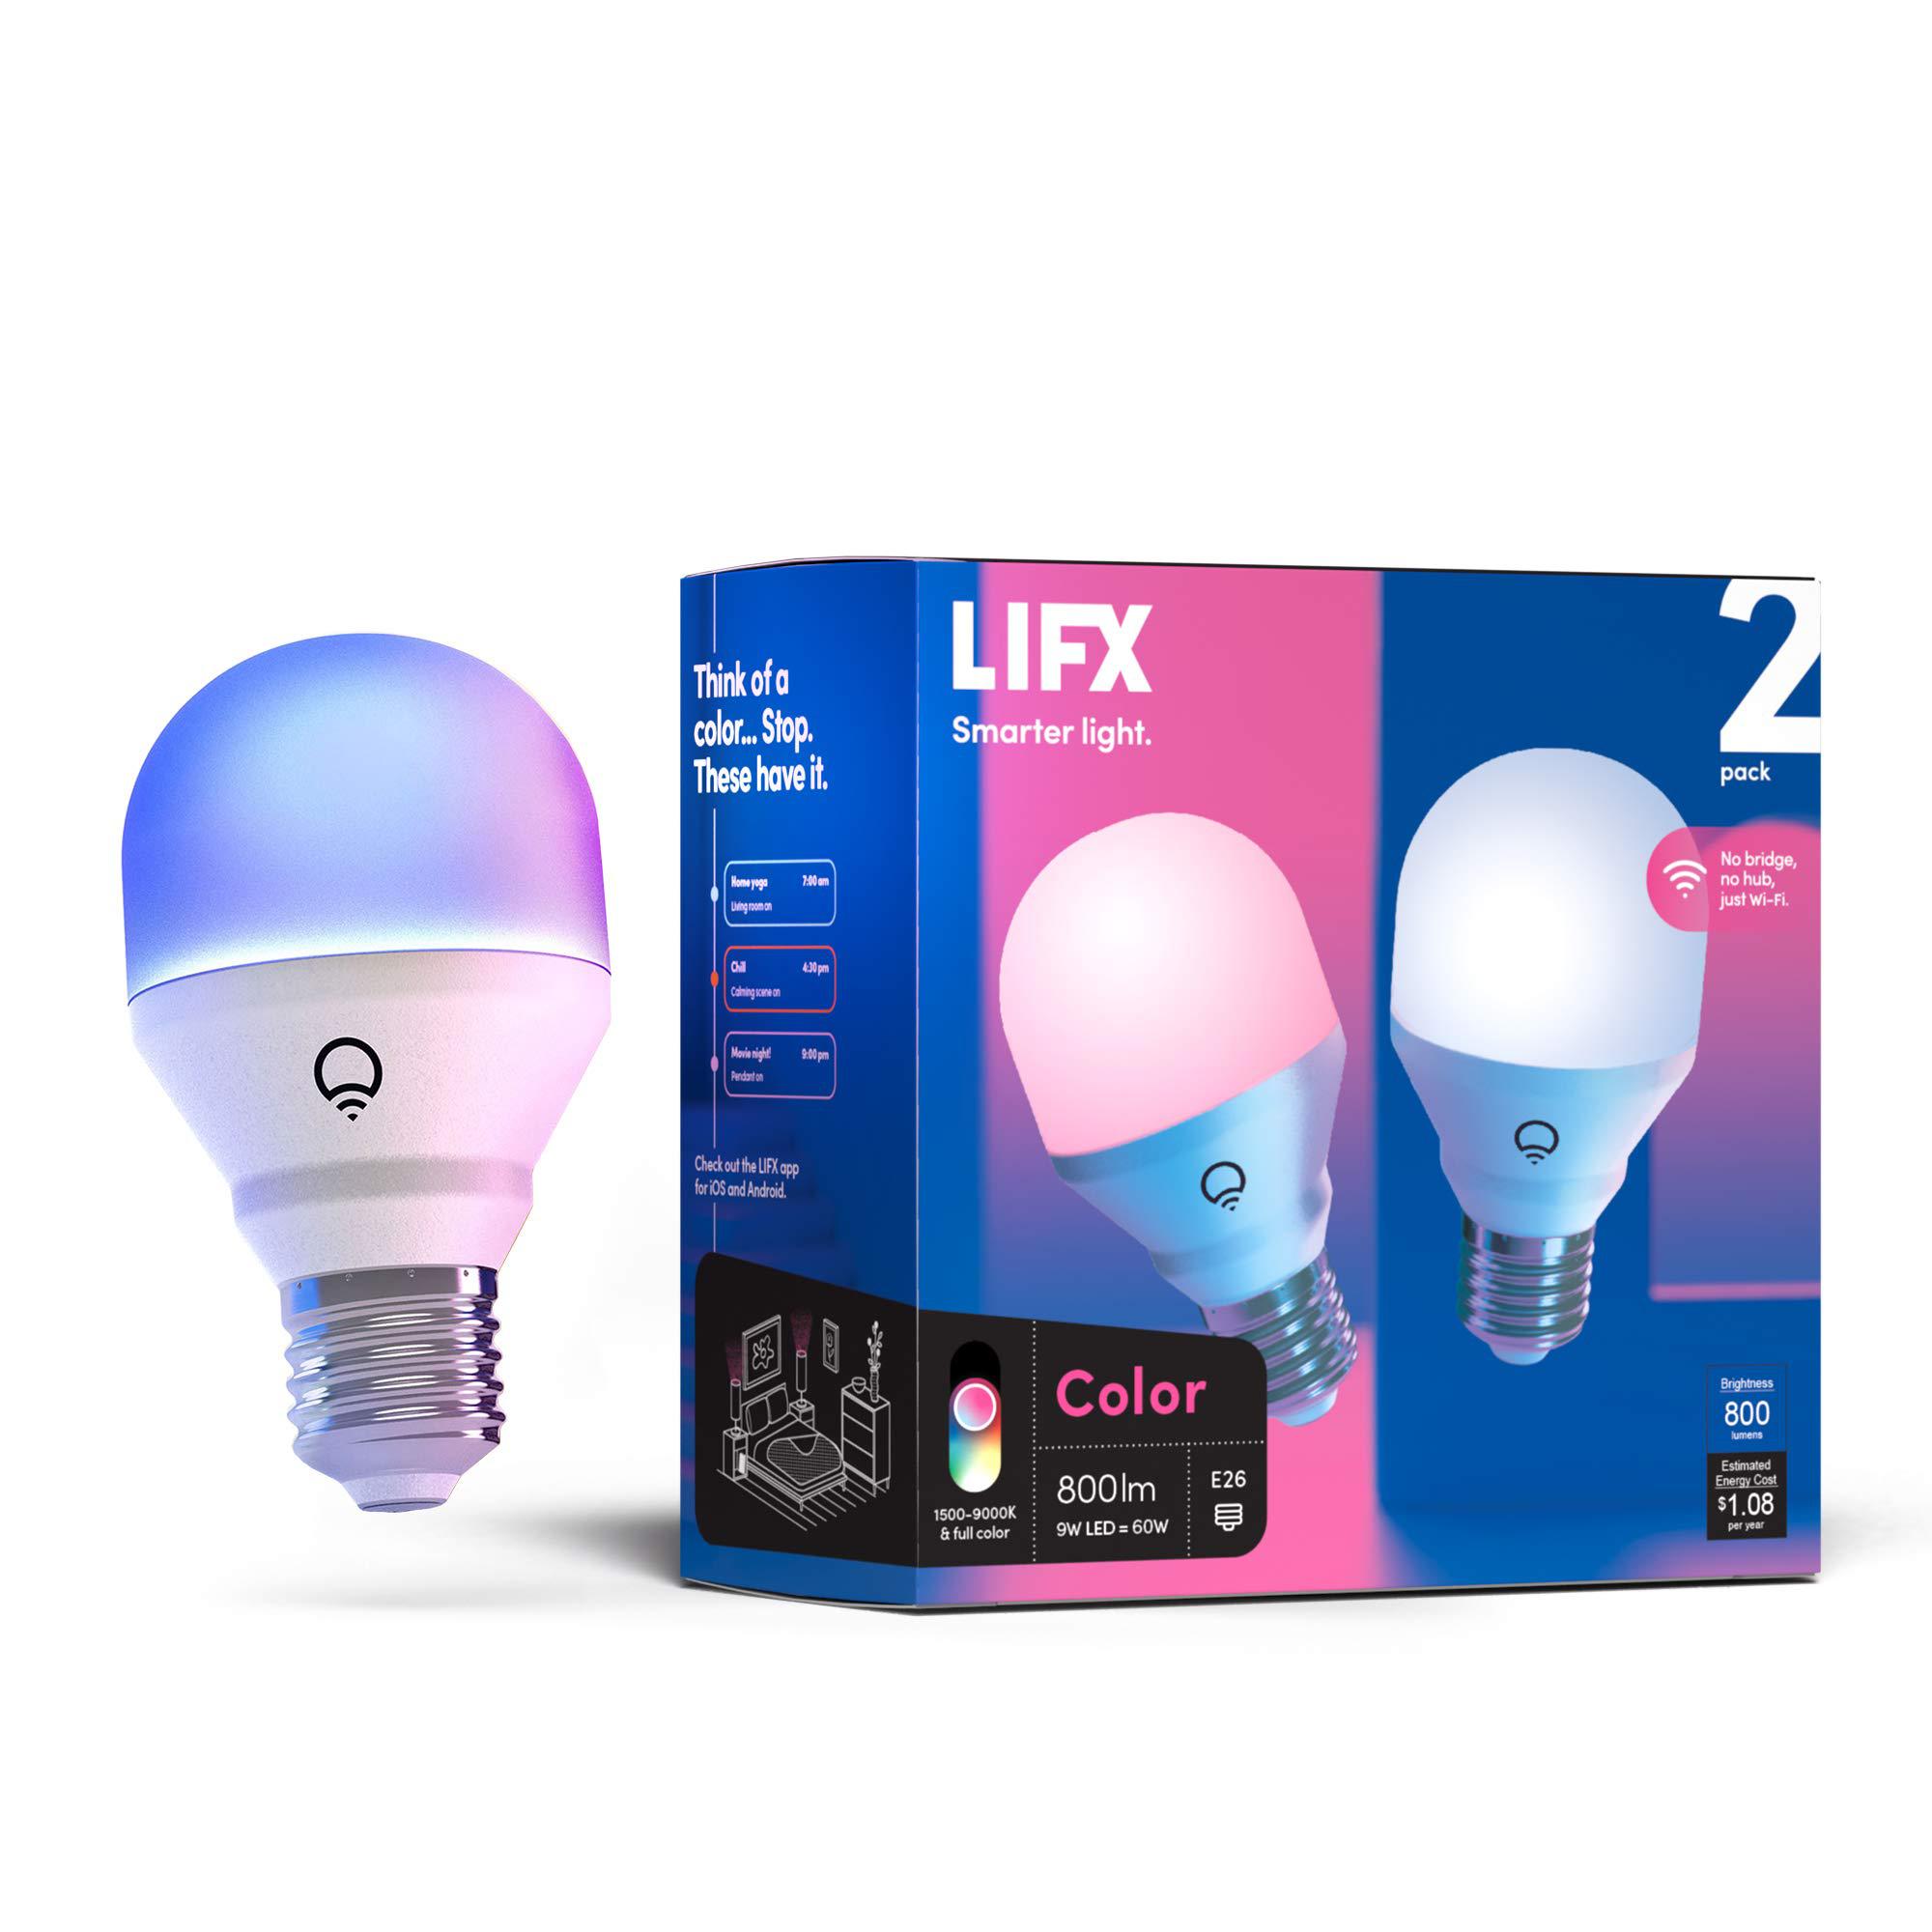 LIFX color a19 lumens, billions of colors and whites, wi-fi smart led light bulb, no bridge required, works with alexa,